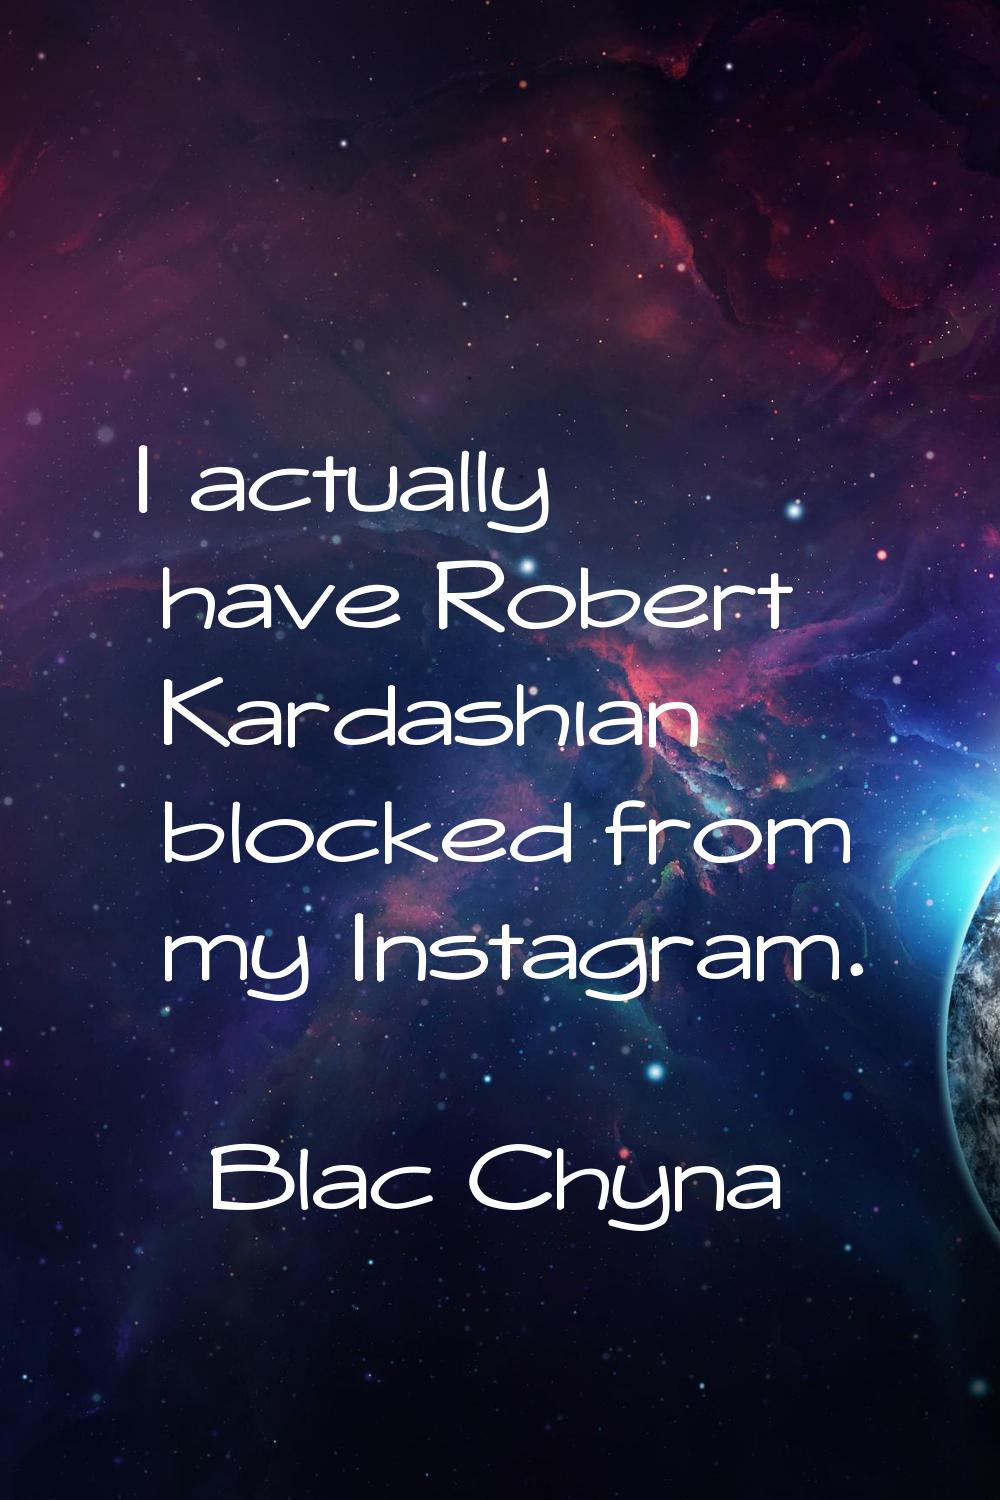 I actually have Robert Kardashian blocked from my Instagram.